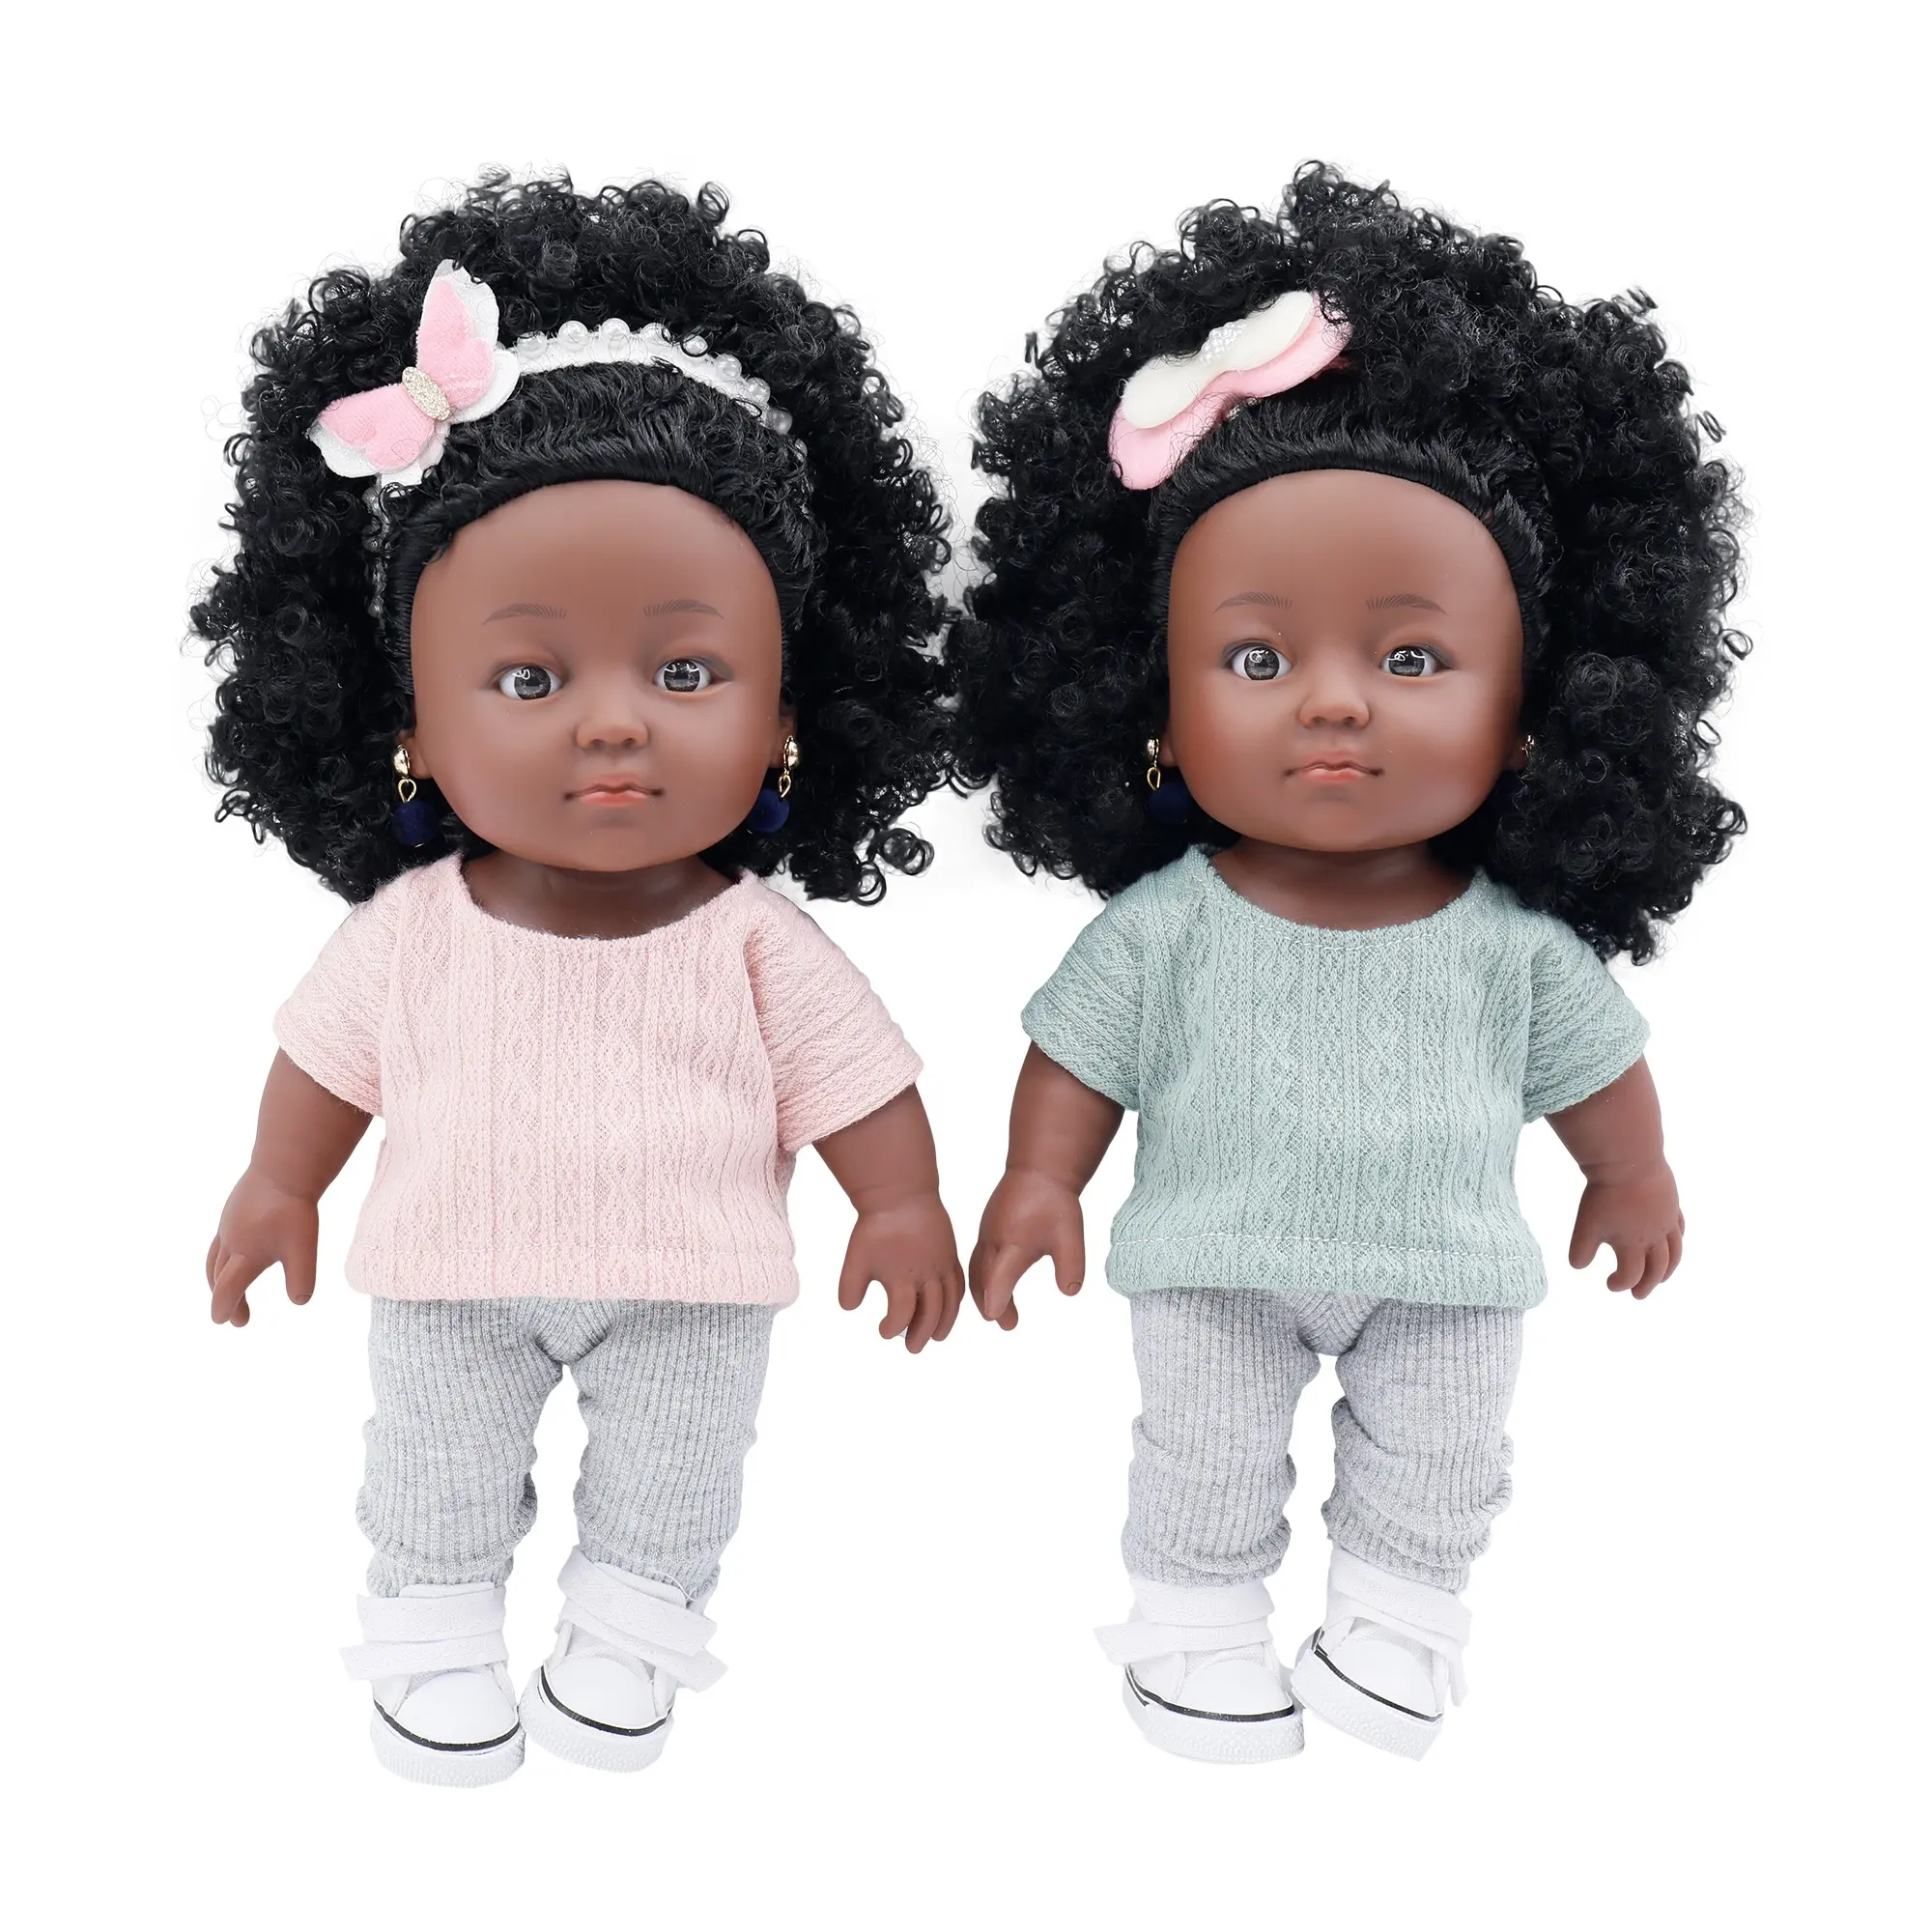 Tusalmo 25CM Black Doll Realistic Fashion Doll Clothes Gift Black Baby Dolls For Kids